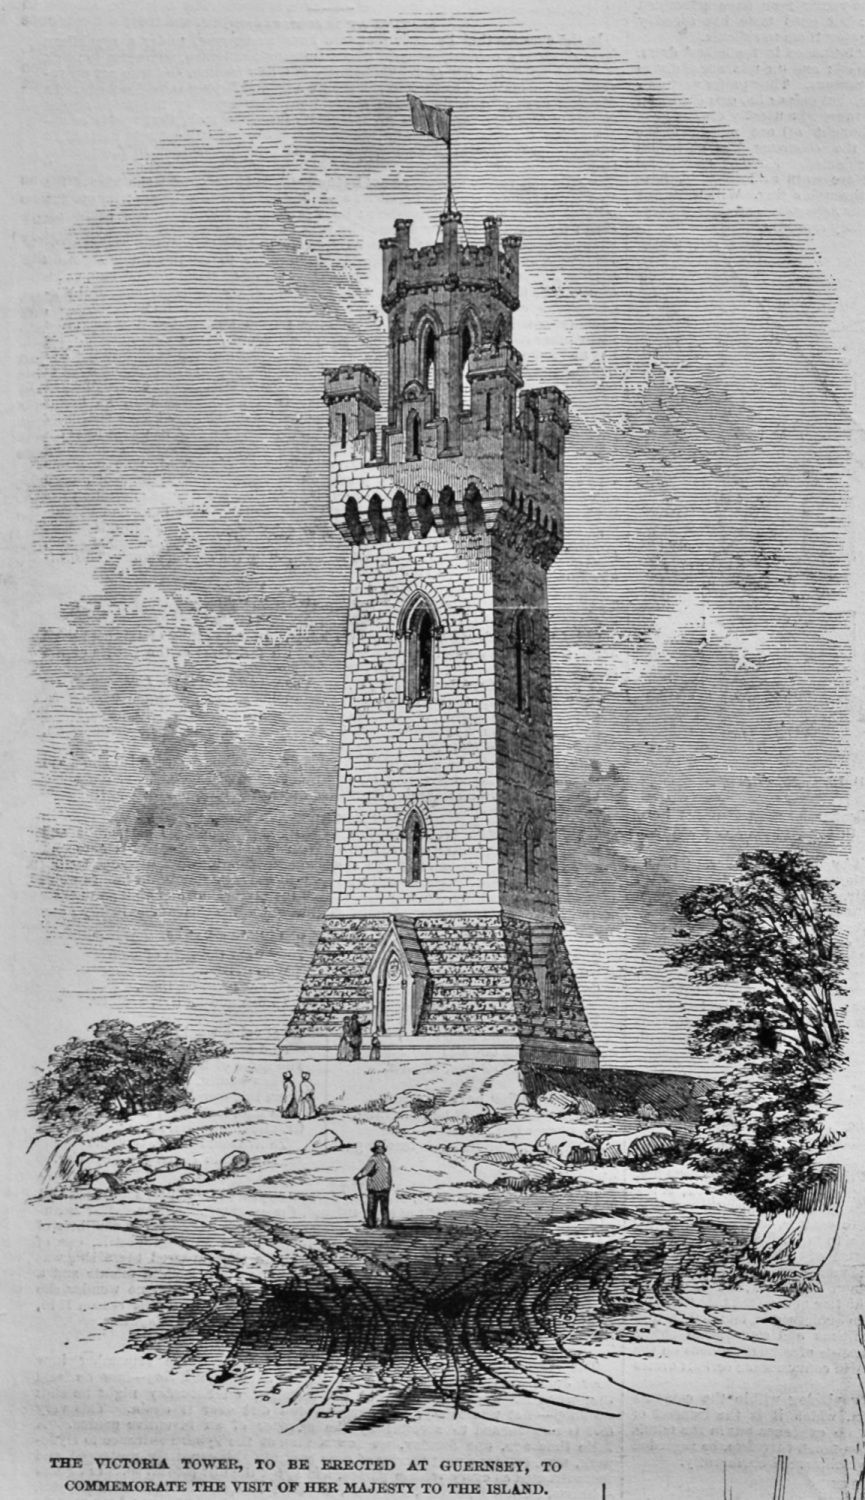 The Victoria Tower, to be erected at Guernsey, to commemorate the Visit of 